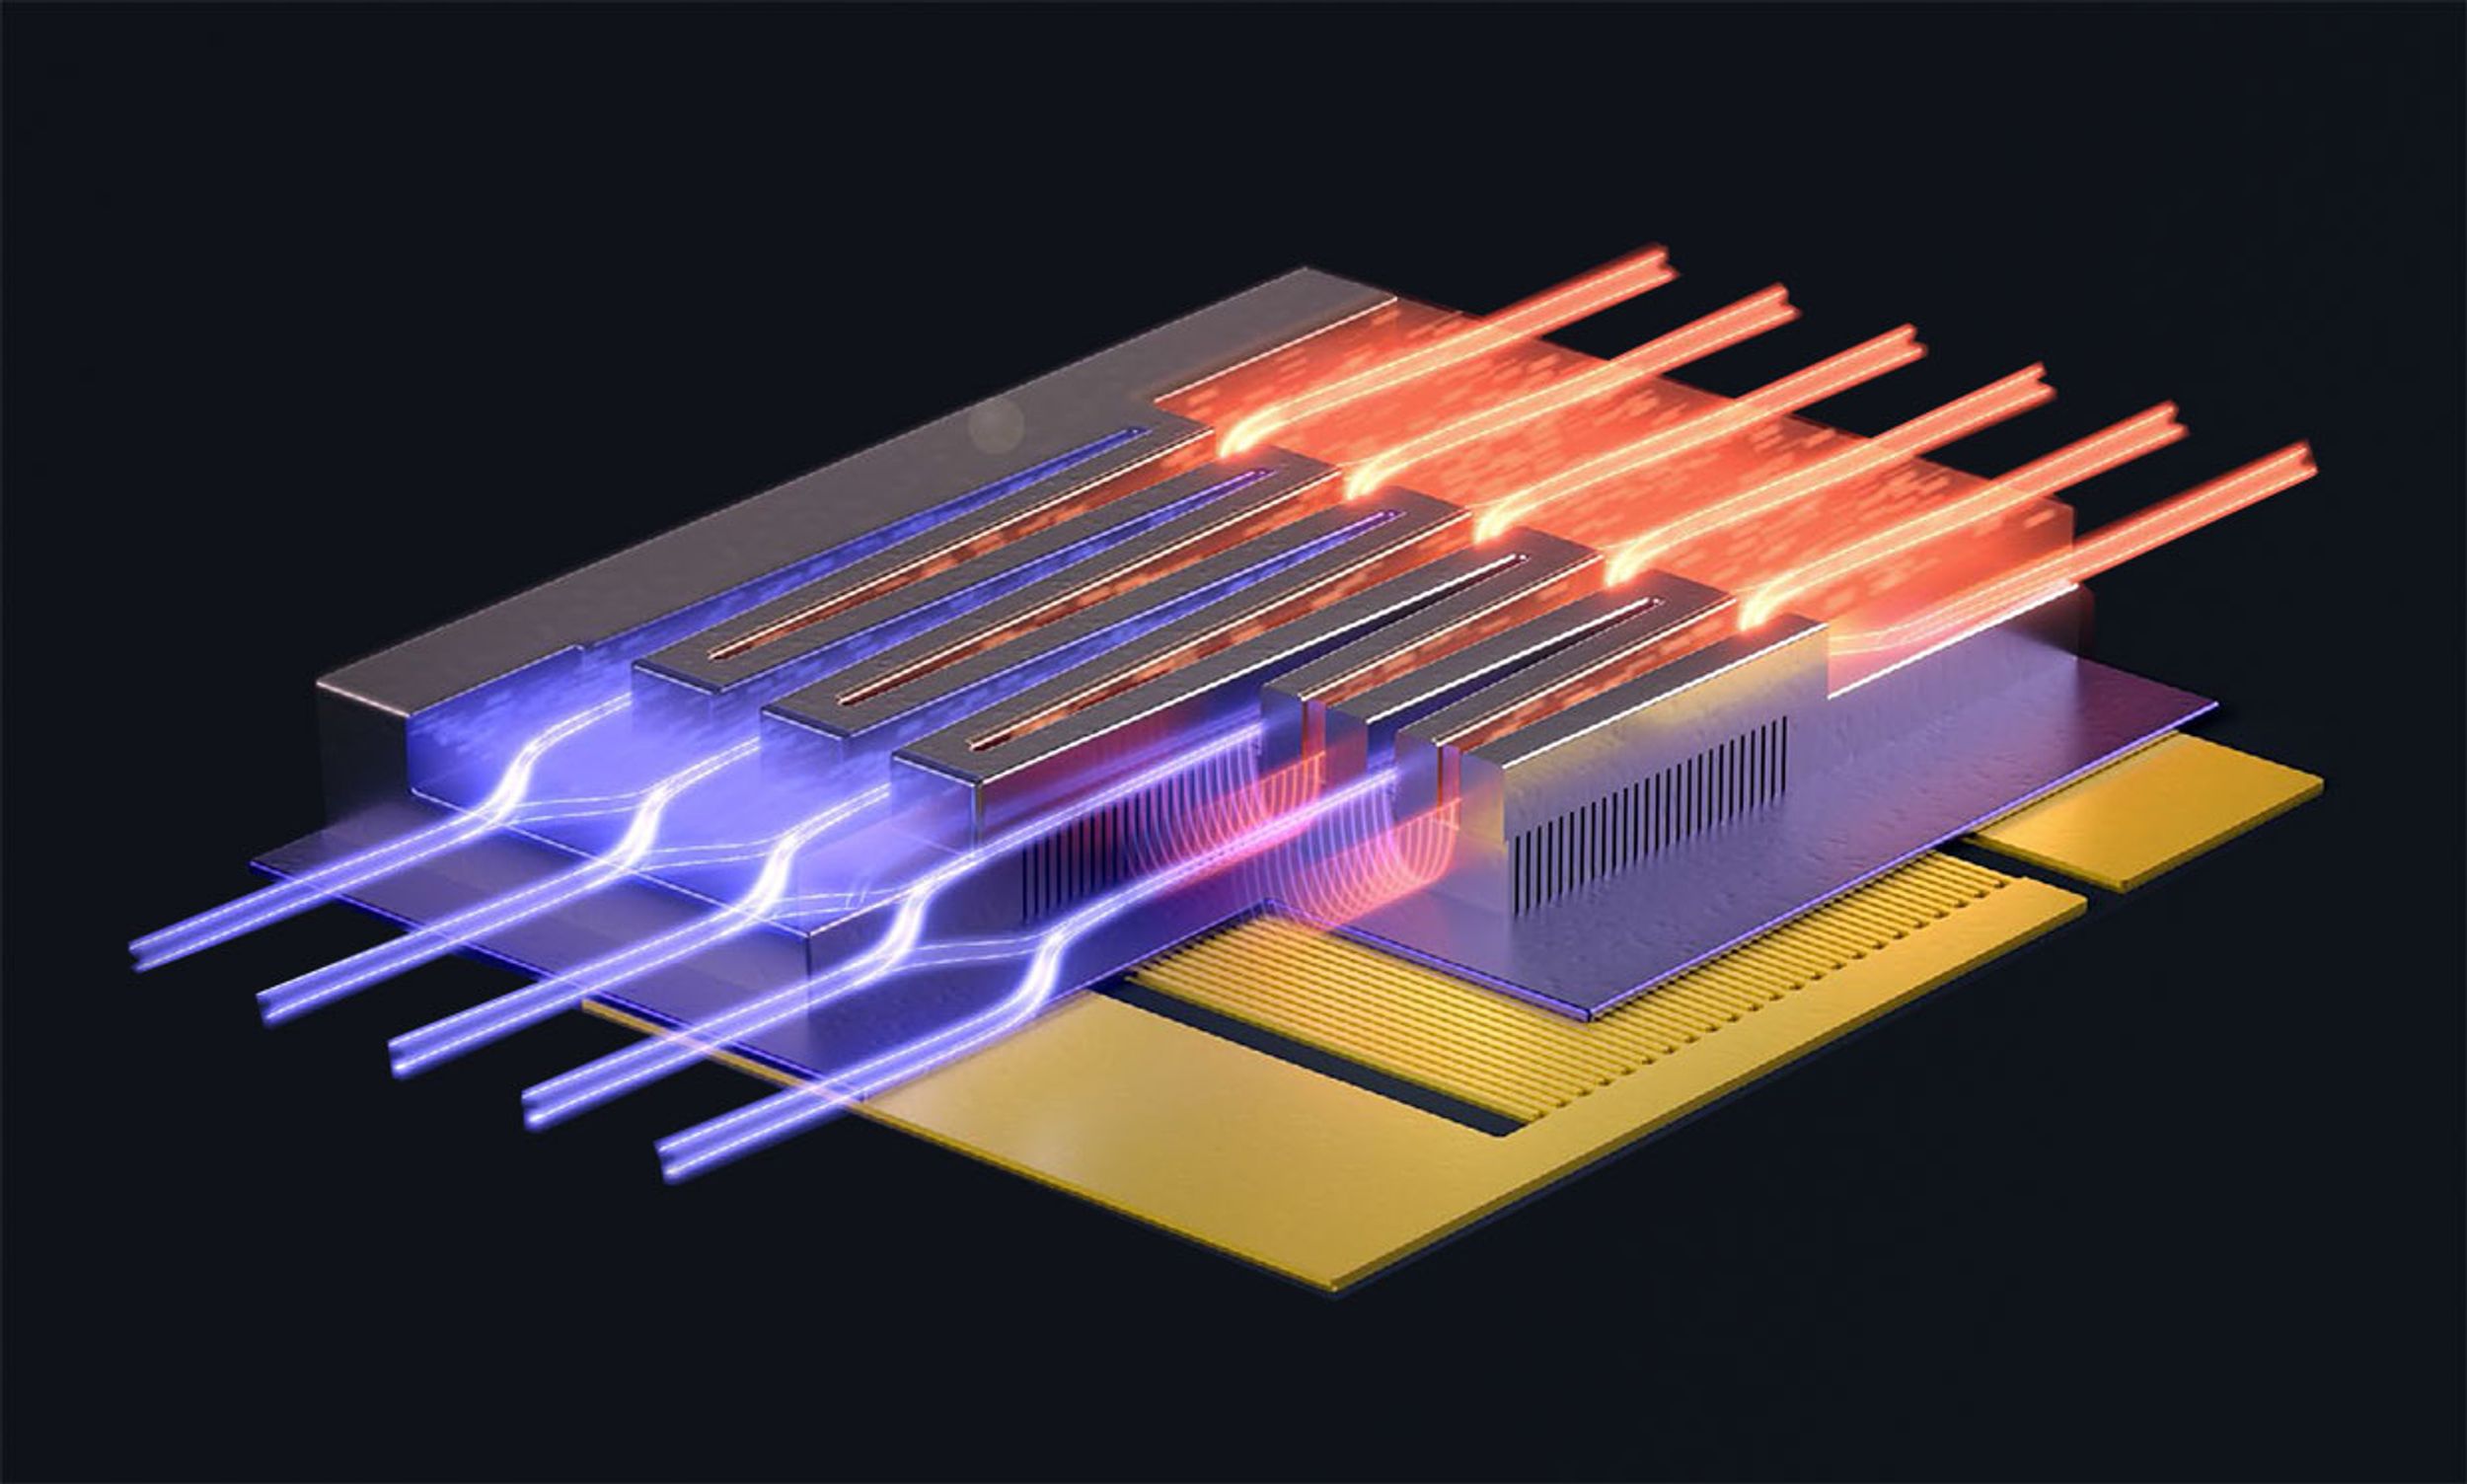 3D rendering of microchip with build in cooling